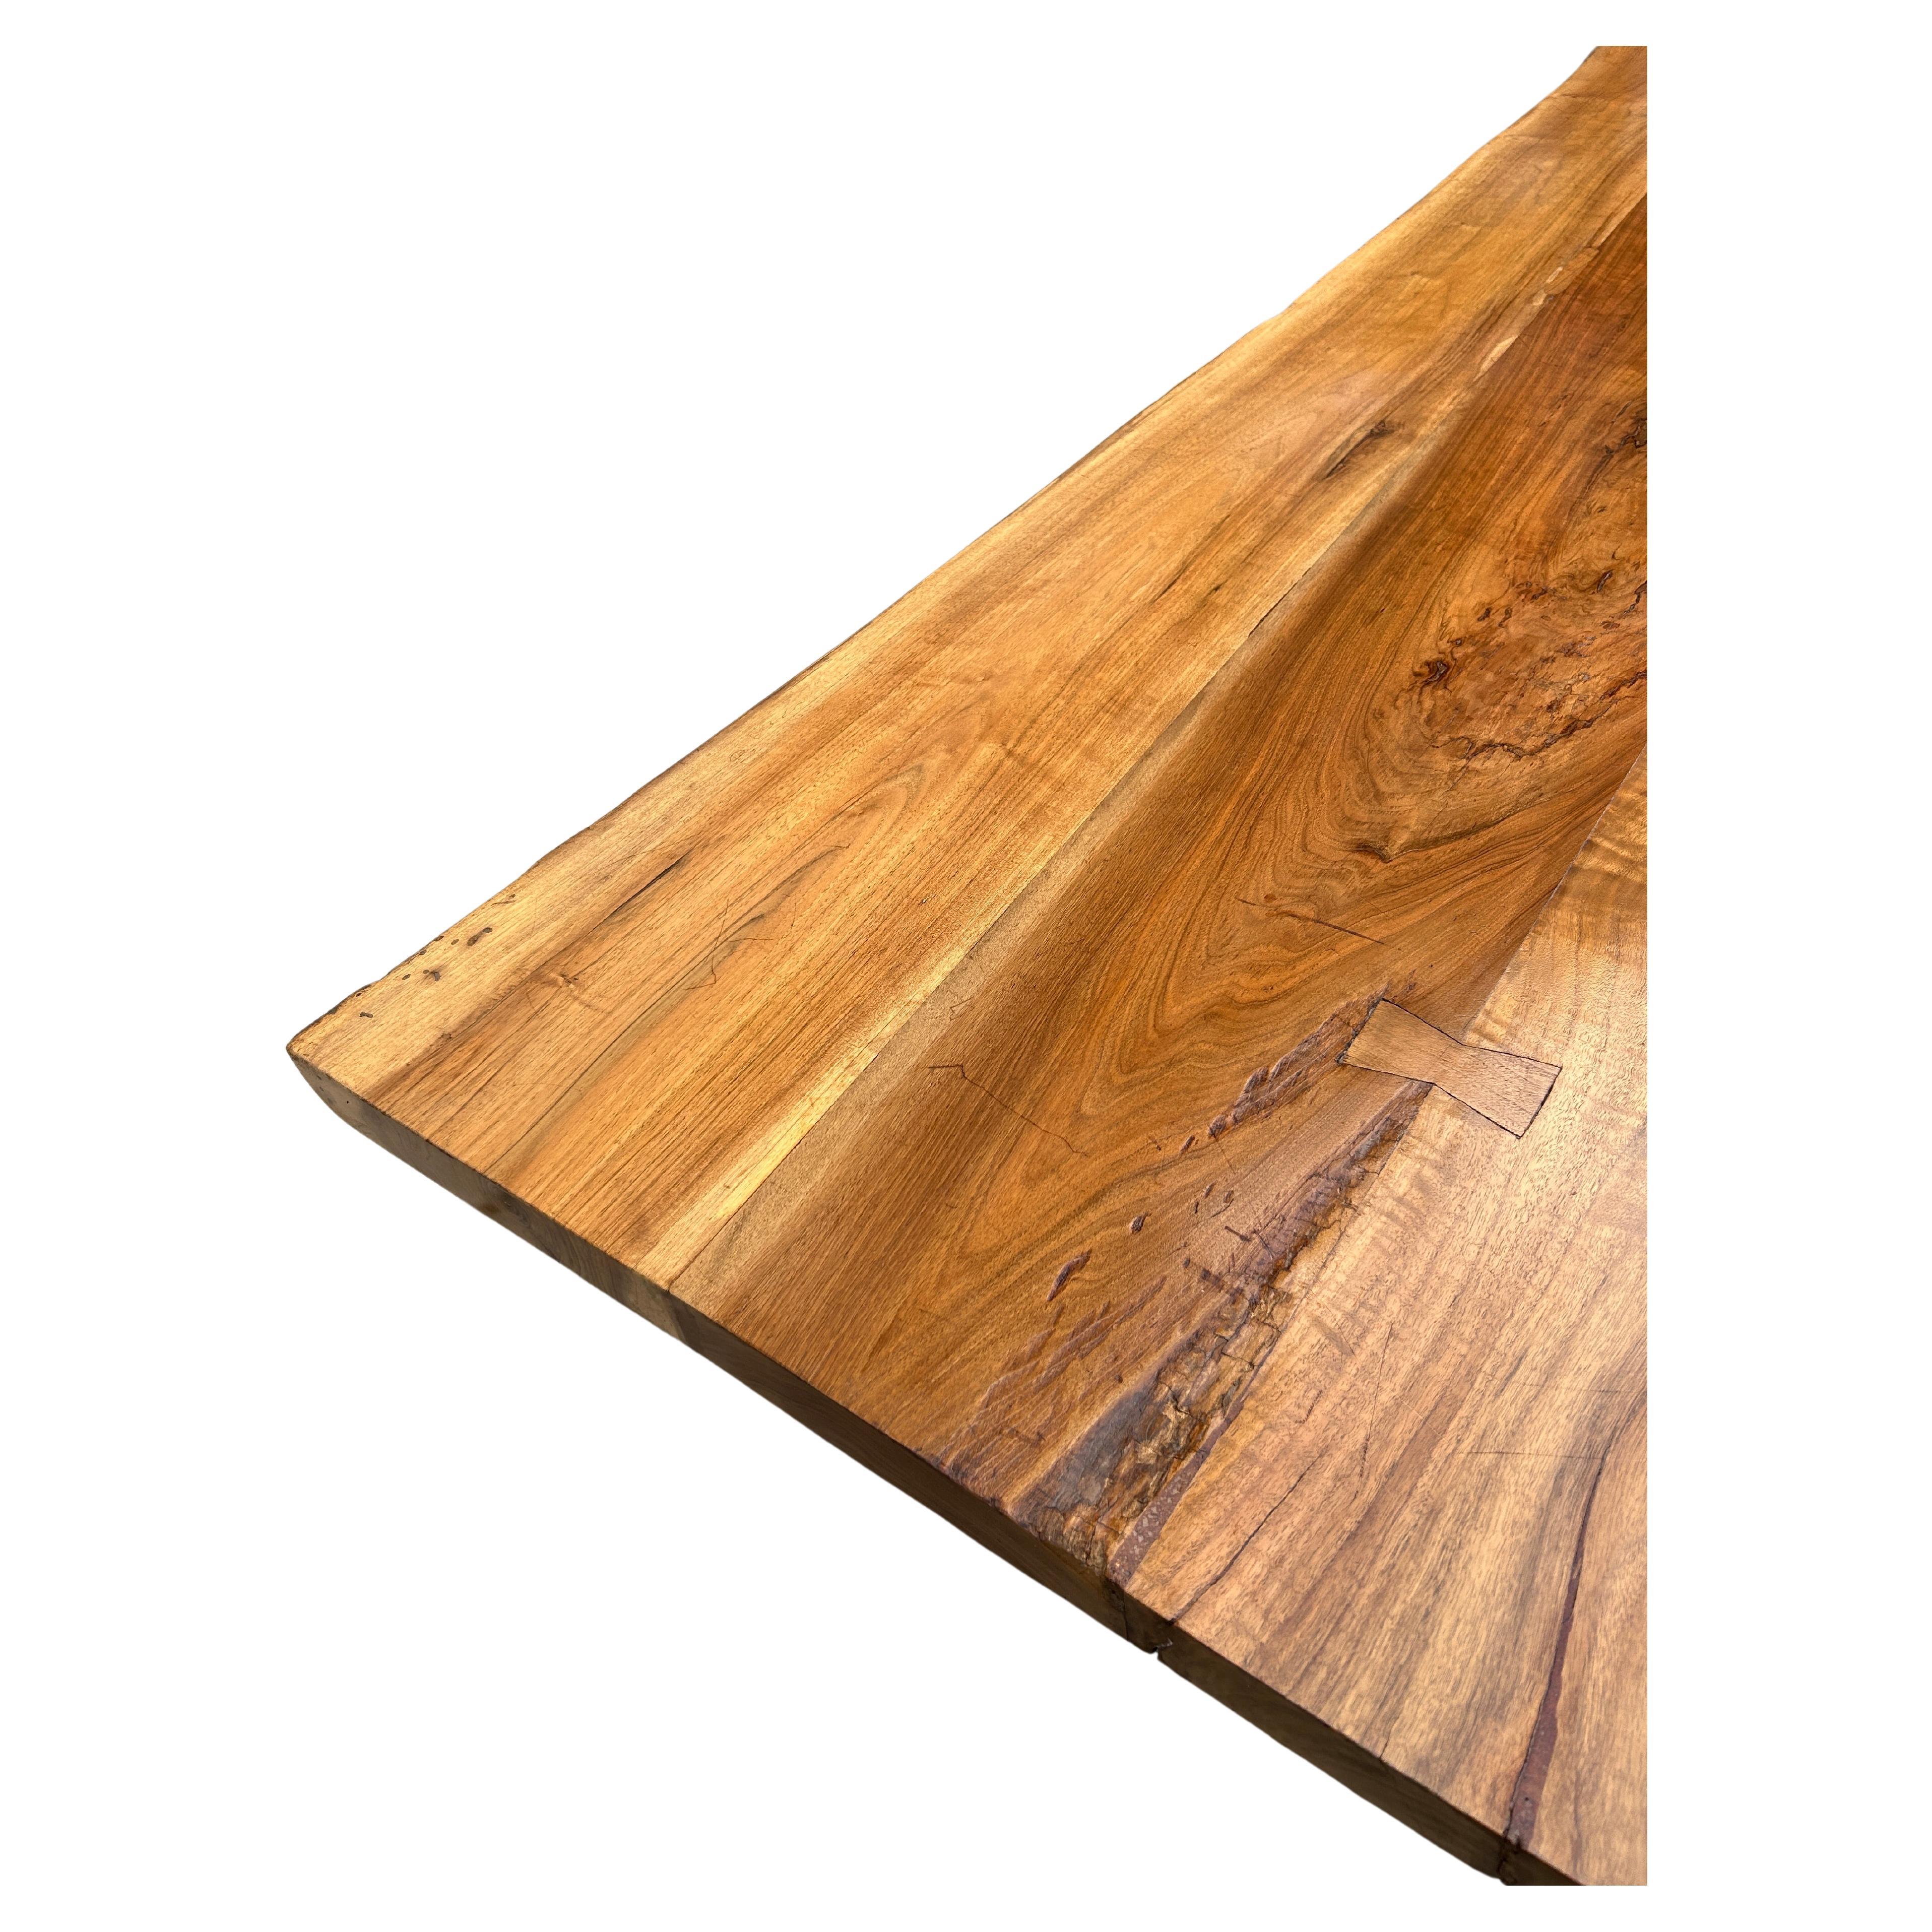 Beautiful live edge hardwood slab dining table the style of Nakashima. thick slab with live edges on both sides and butterfly joints. The table measures 80